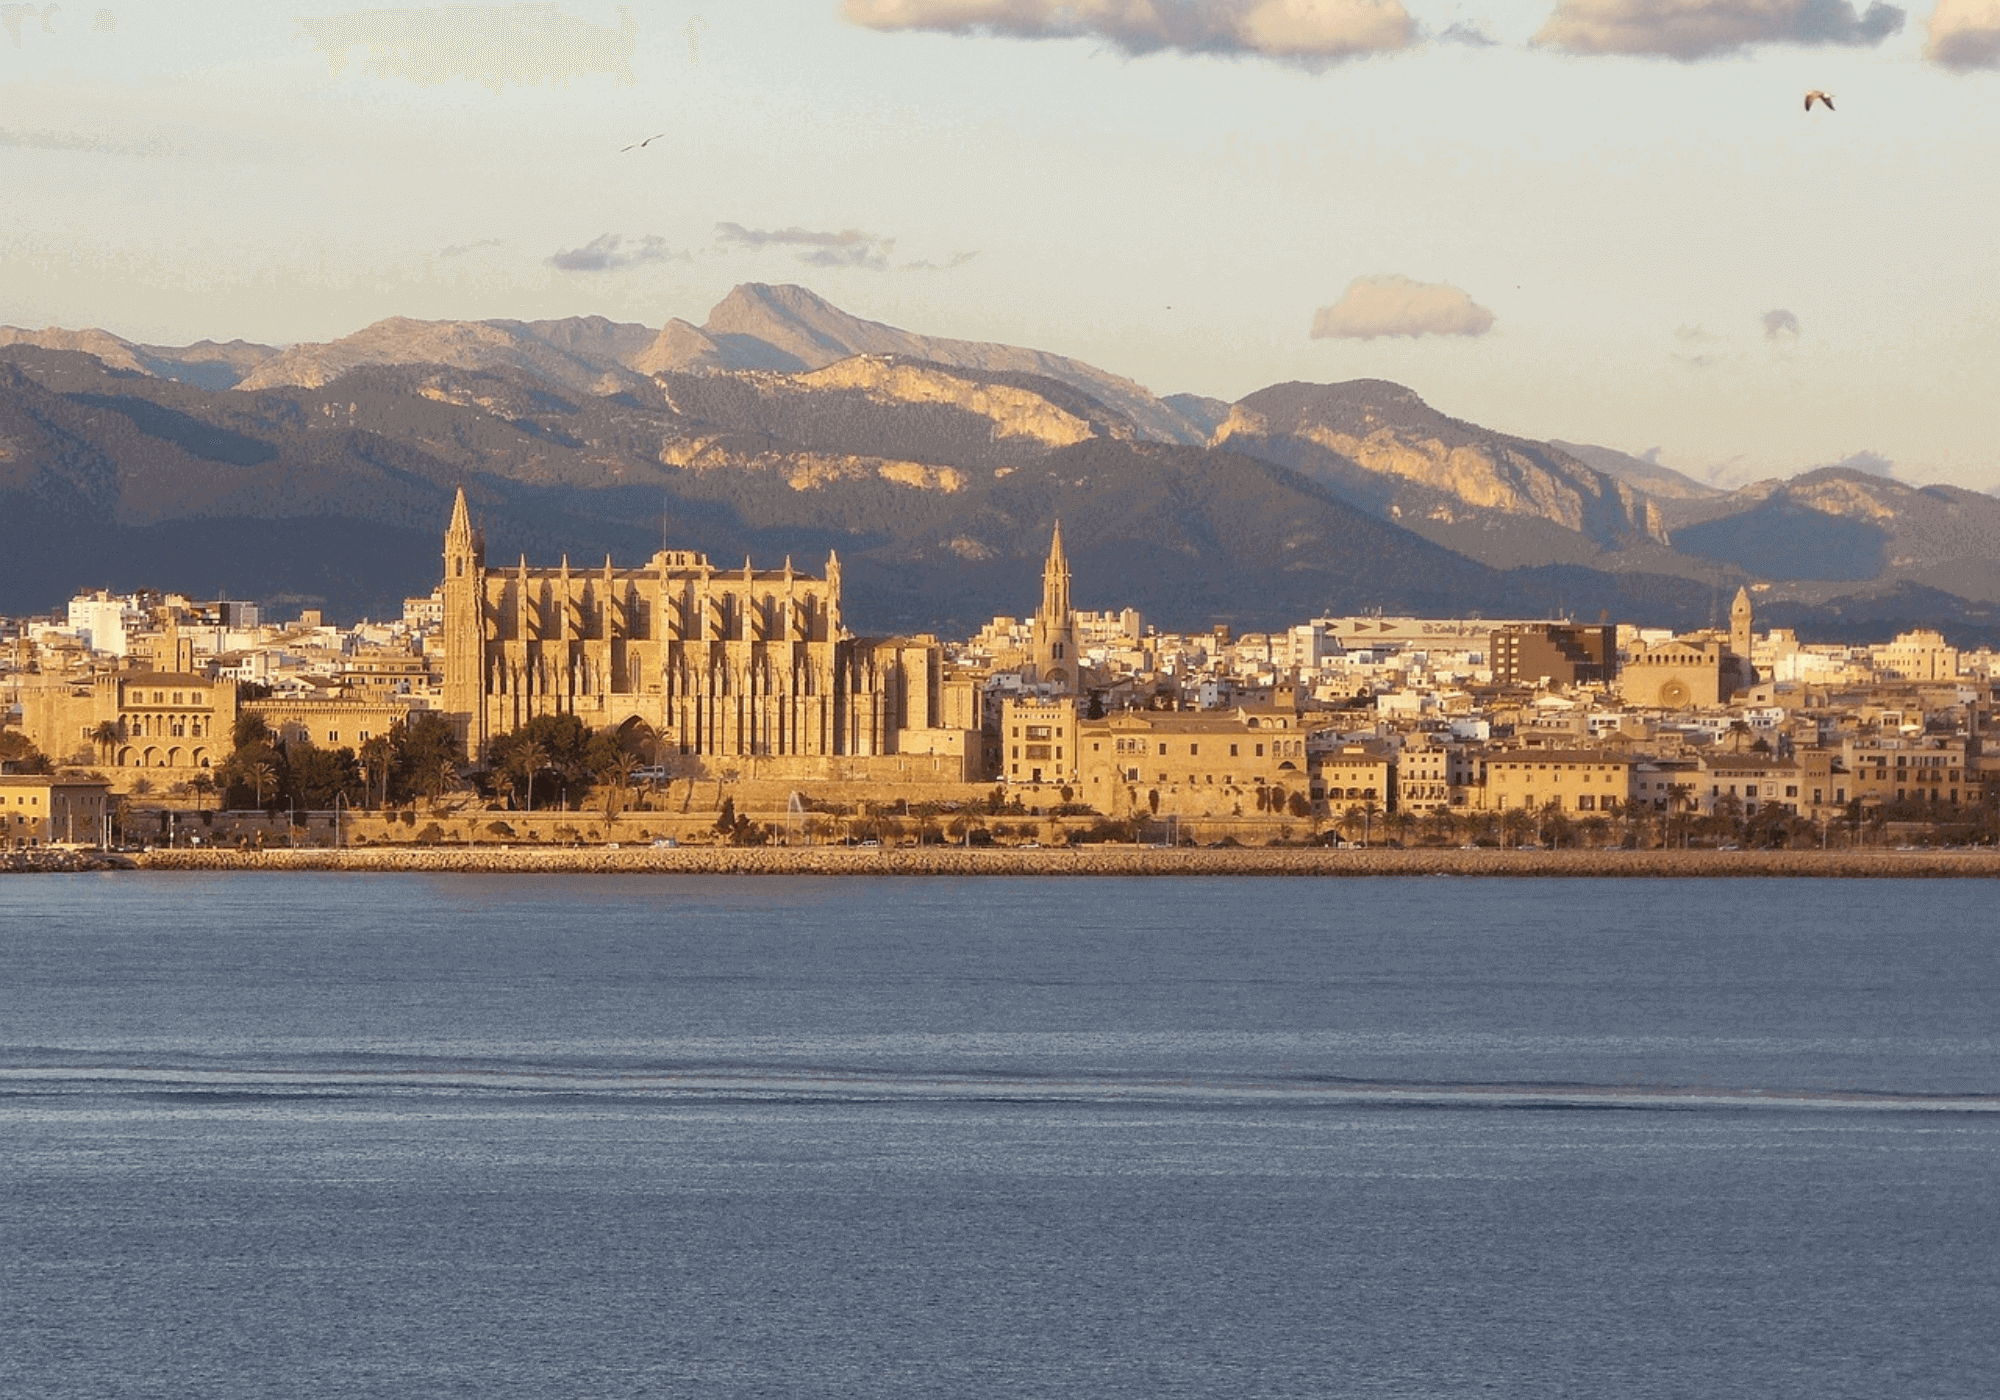 view of palma cathedral with the mountains in the background